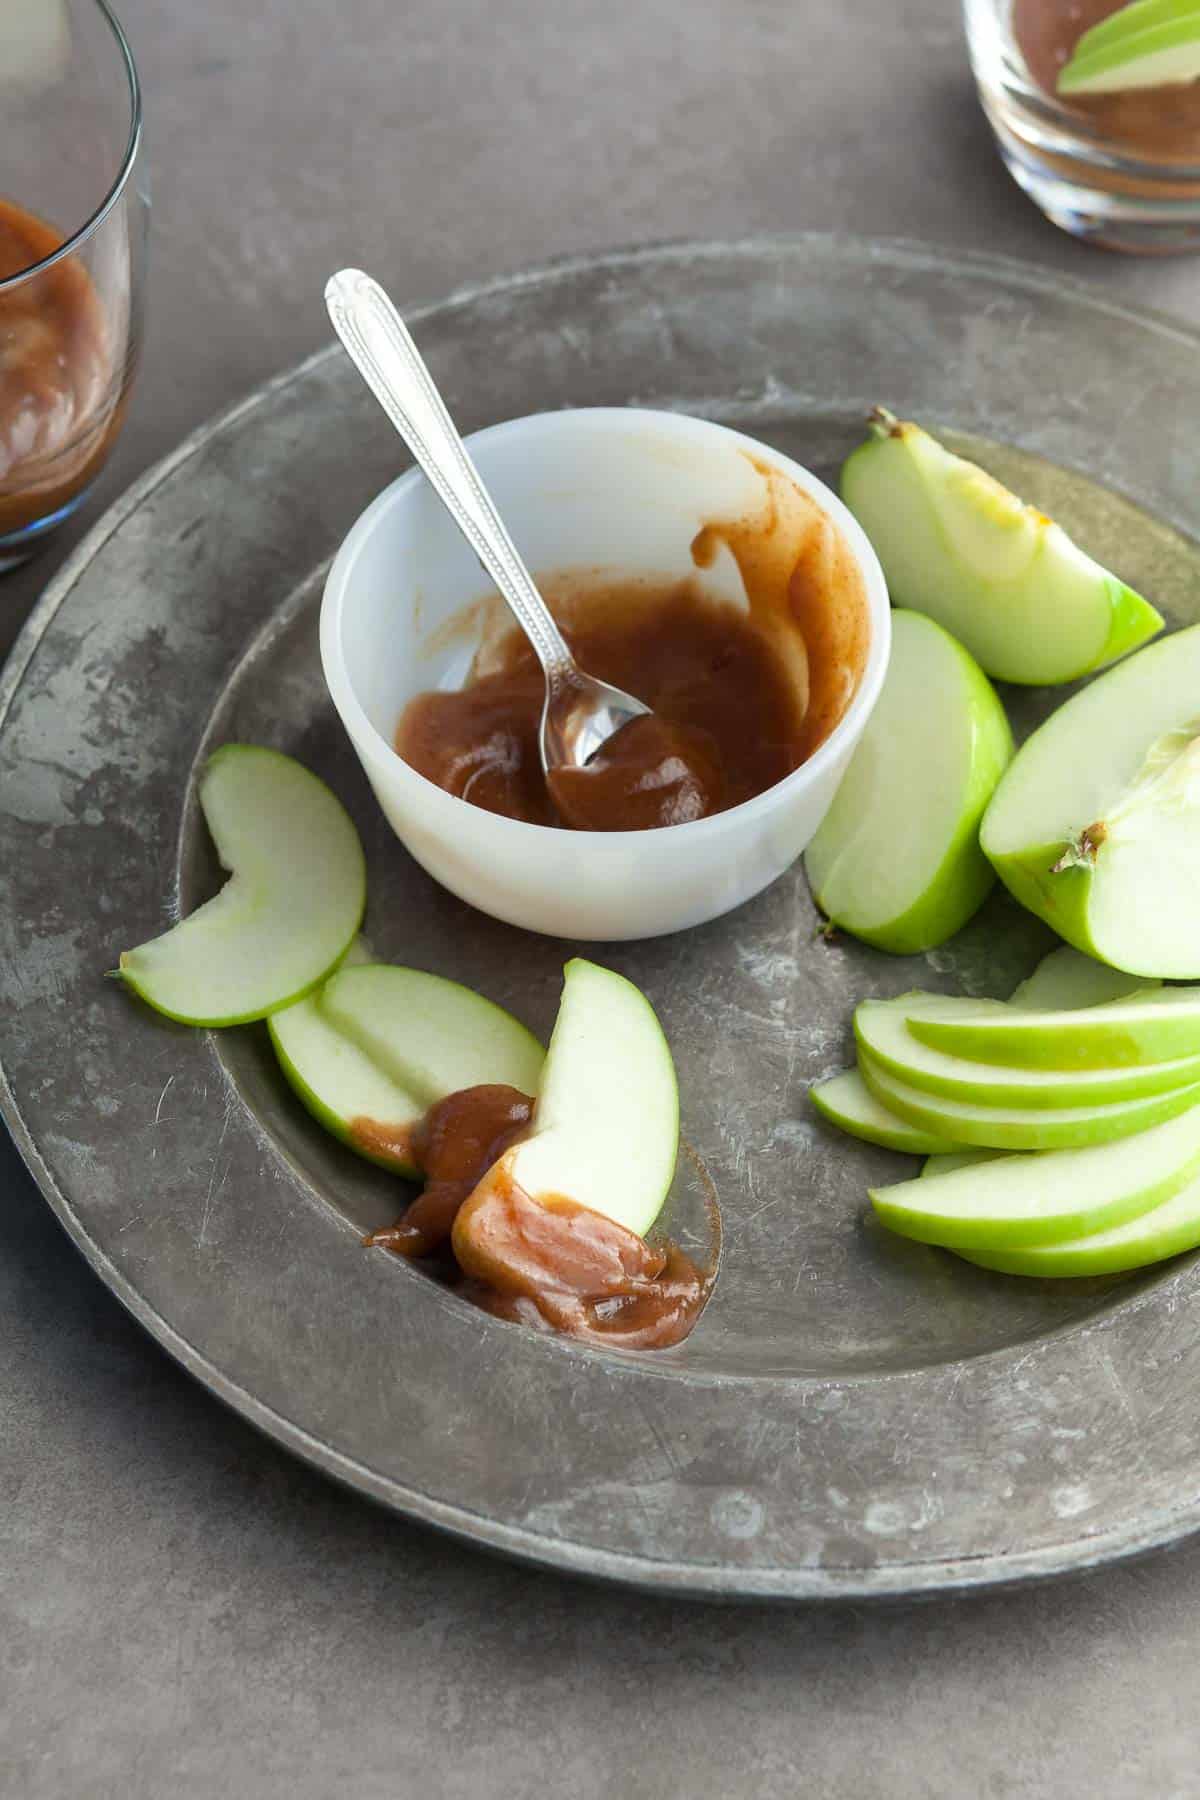 Date Caramel in Bowl with Apple Slices